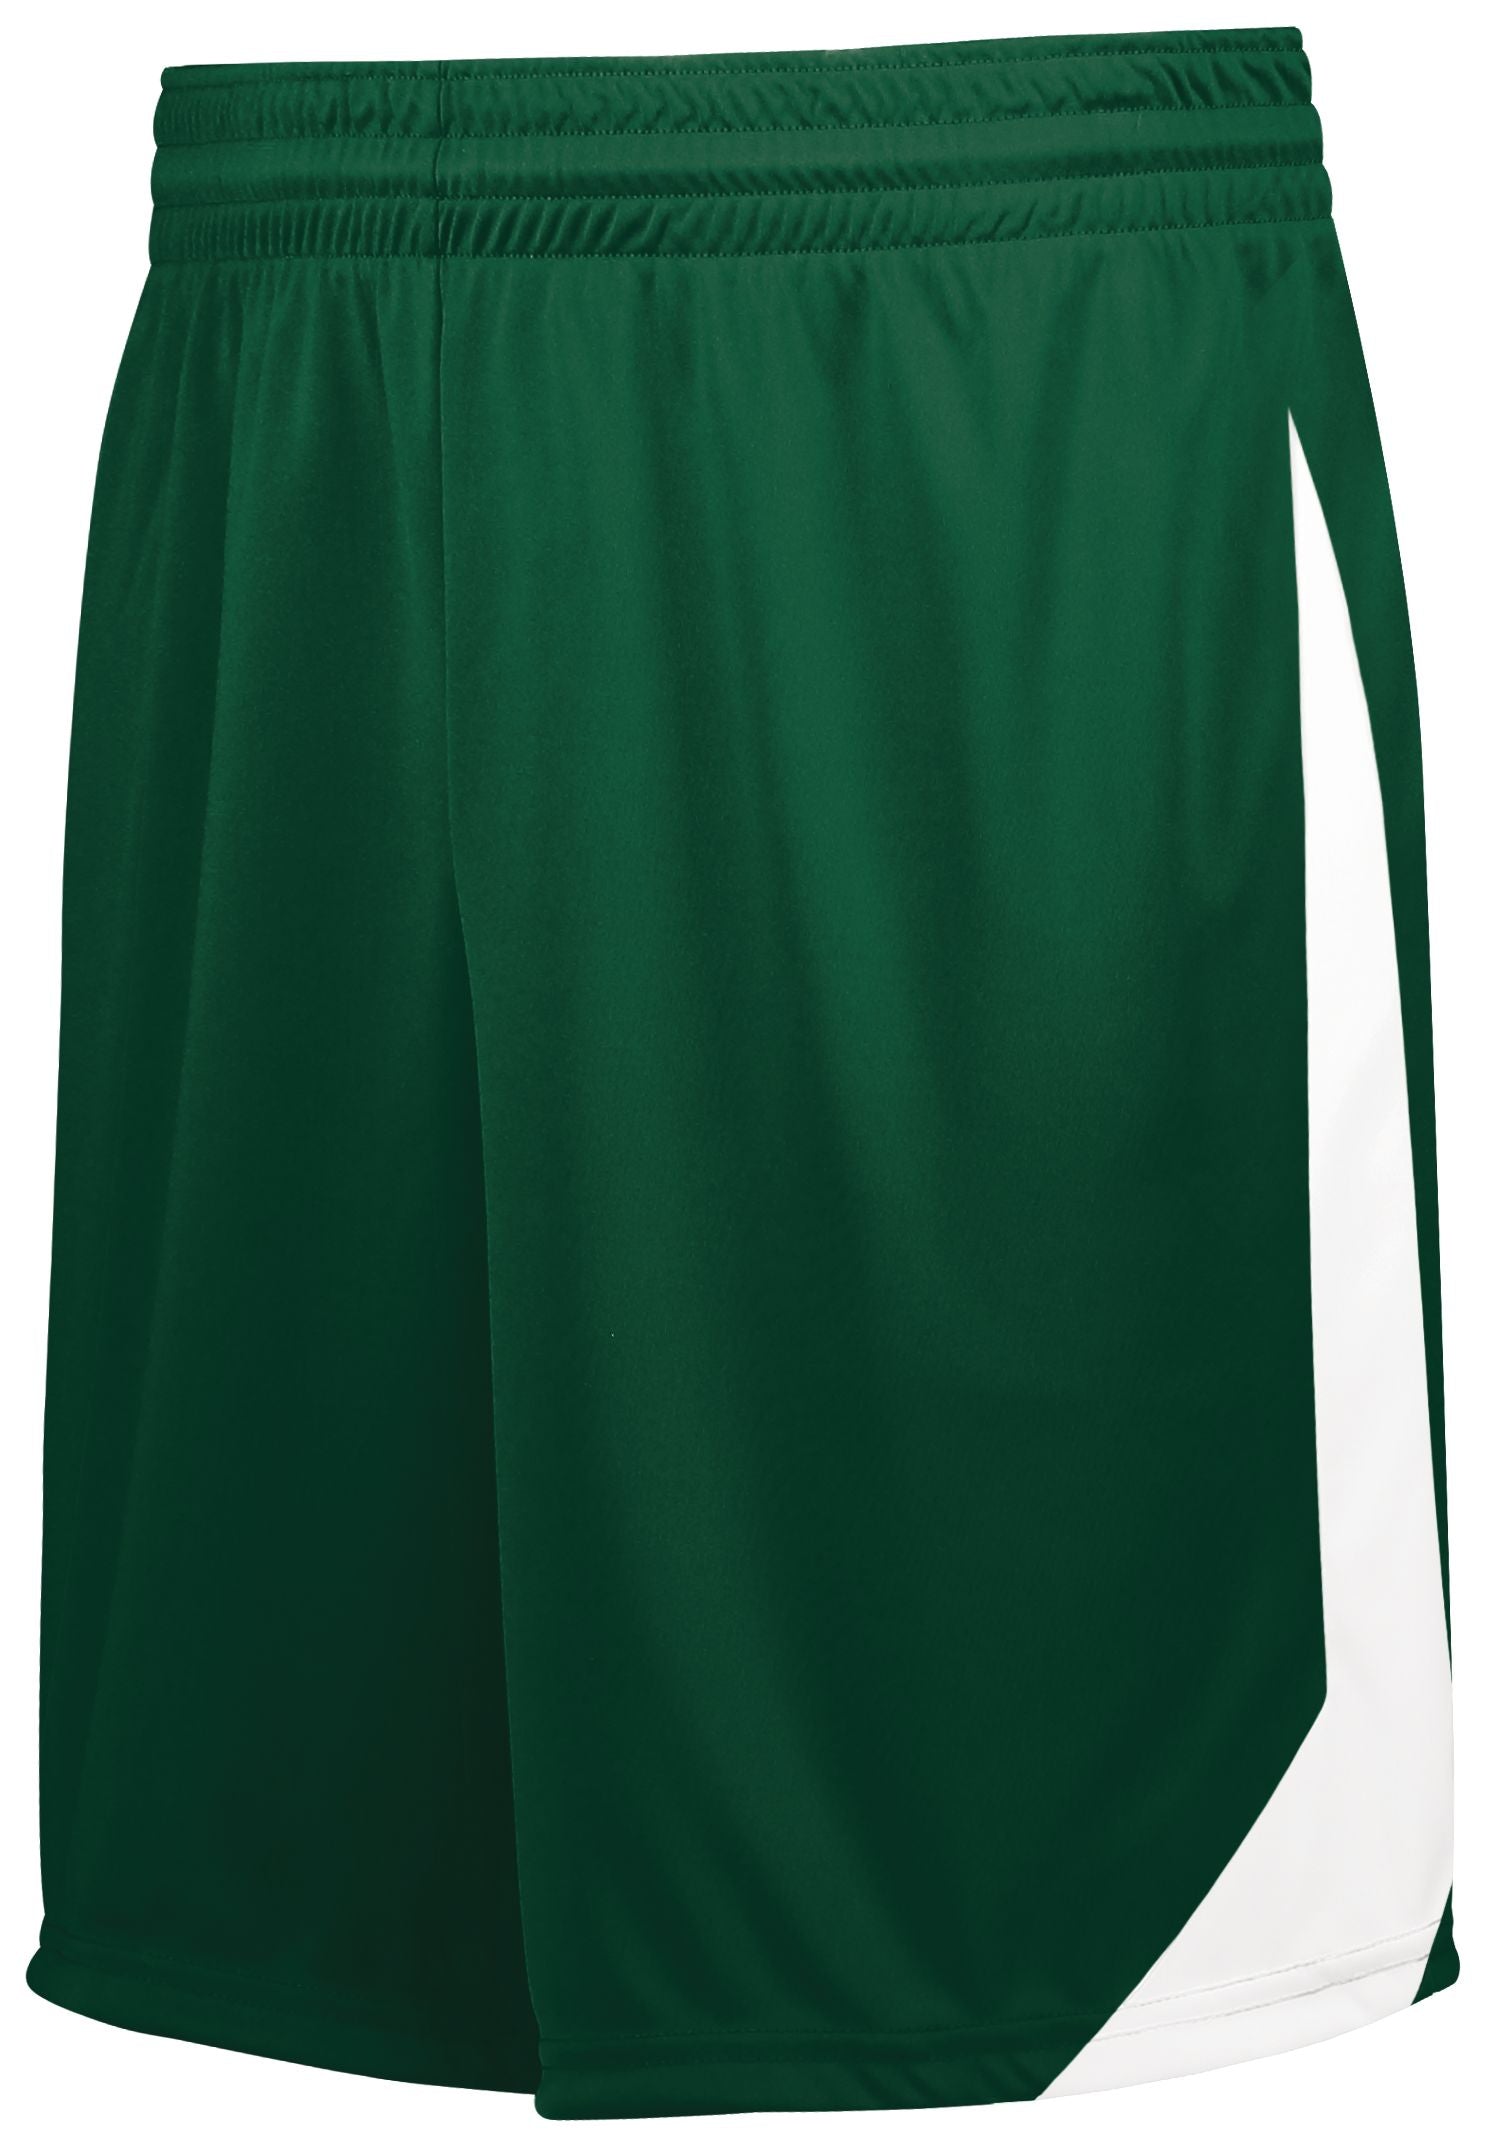 High 5 Athletico Shorts in Dark Green/White  -Part of the Adult, Adult-Shorts, High5-Products, Soccer, All-Sports-1 product lines at KanaleyCreations.com